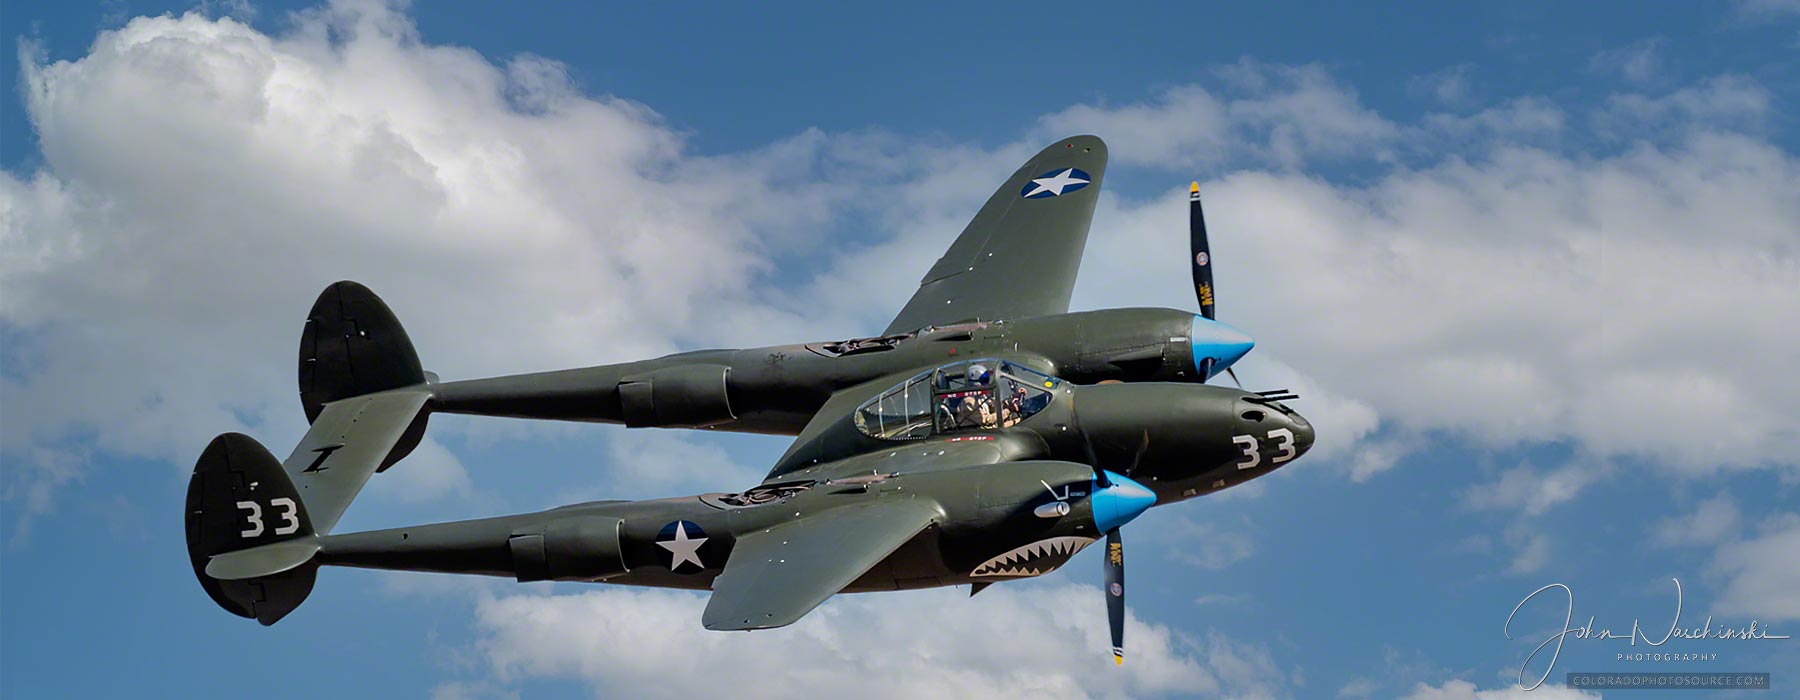 Photos Of The Lockheed P 38 Lightning 1942 Wwii Fighter Aircraft